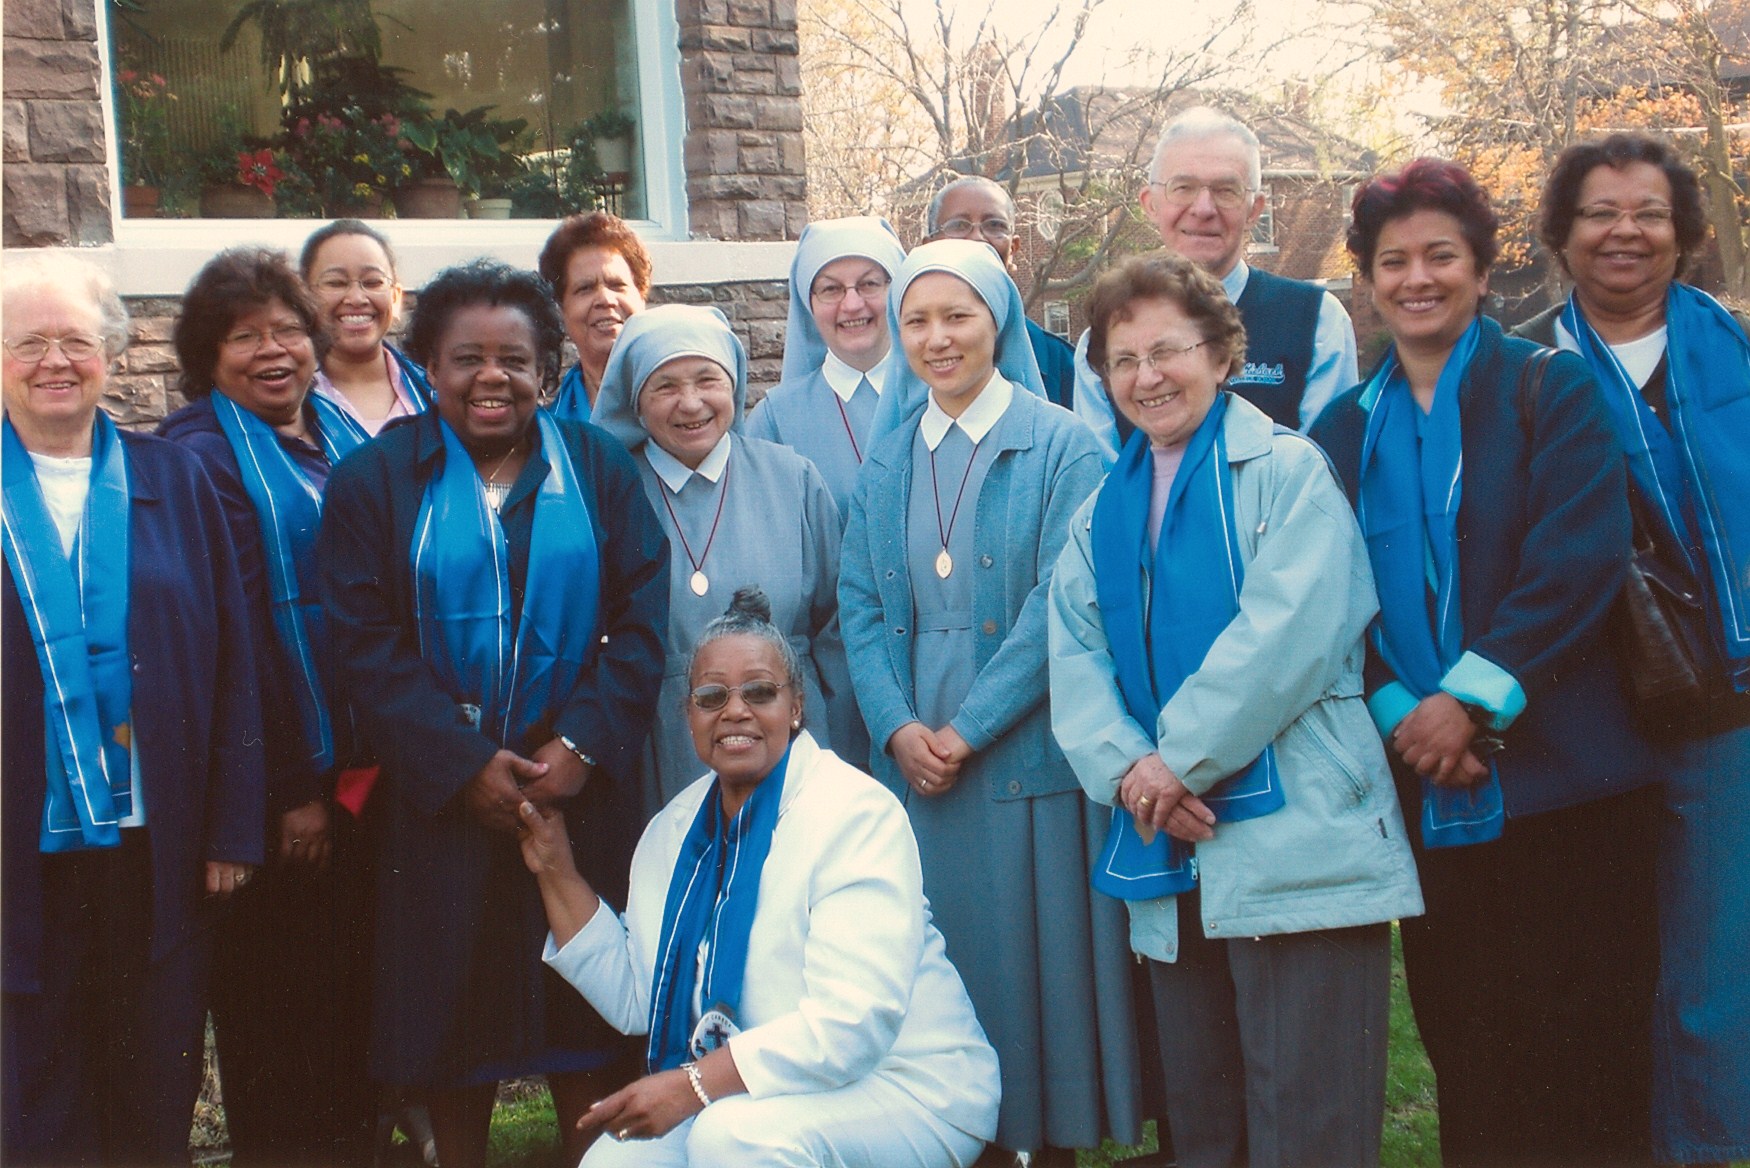 CWL with Sisters of St. Peter Claver